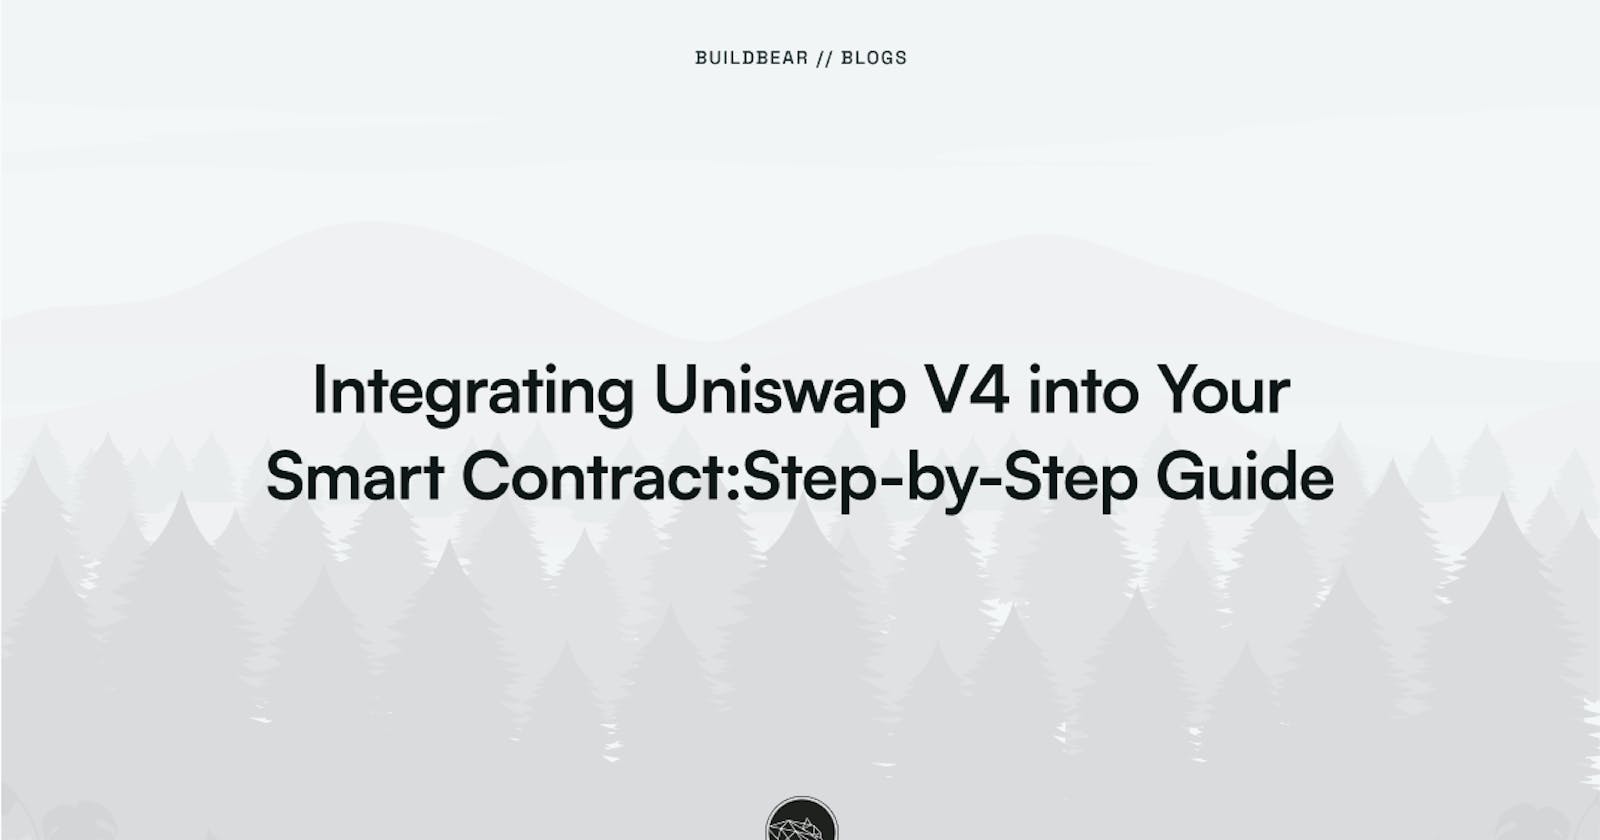 Integrating Uniswap V4 into Your Smart Contracts: A Step-by-Step Guide